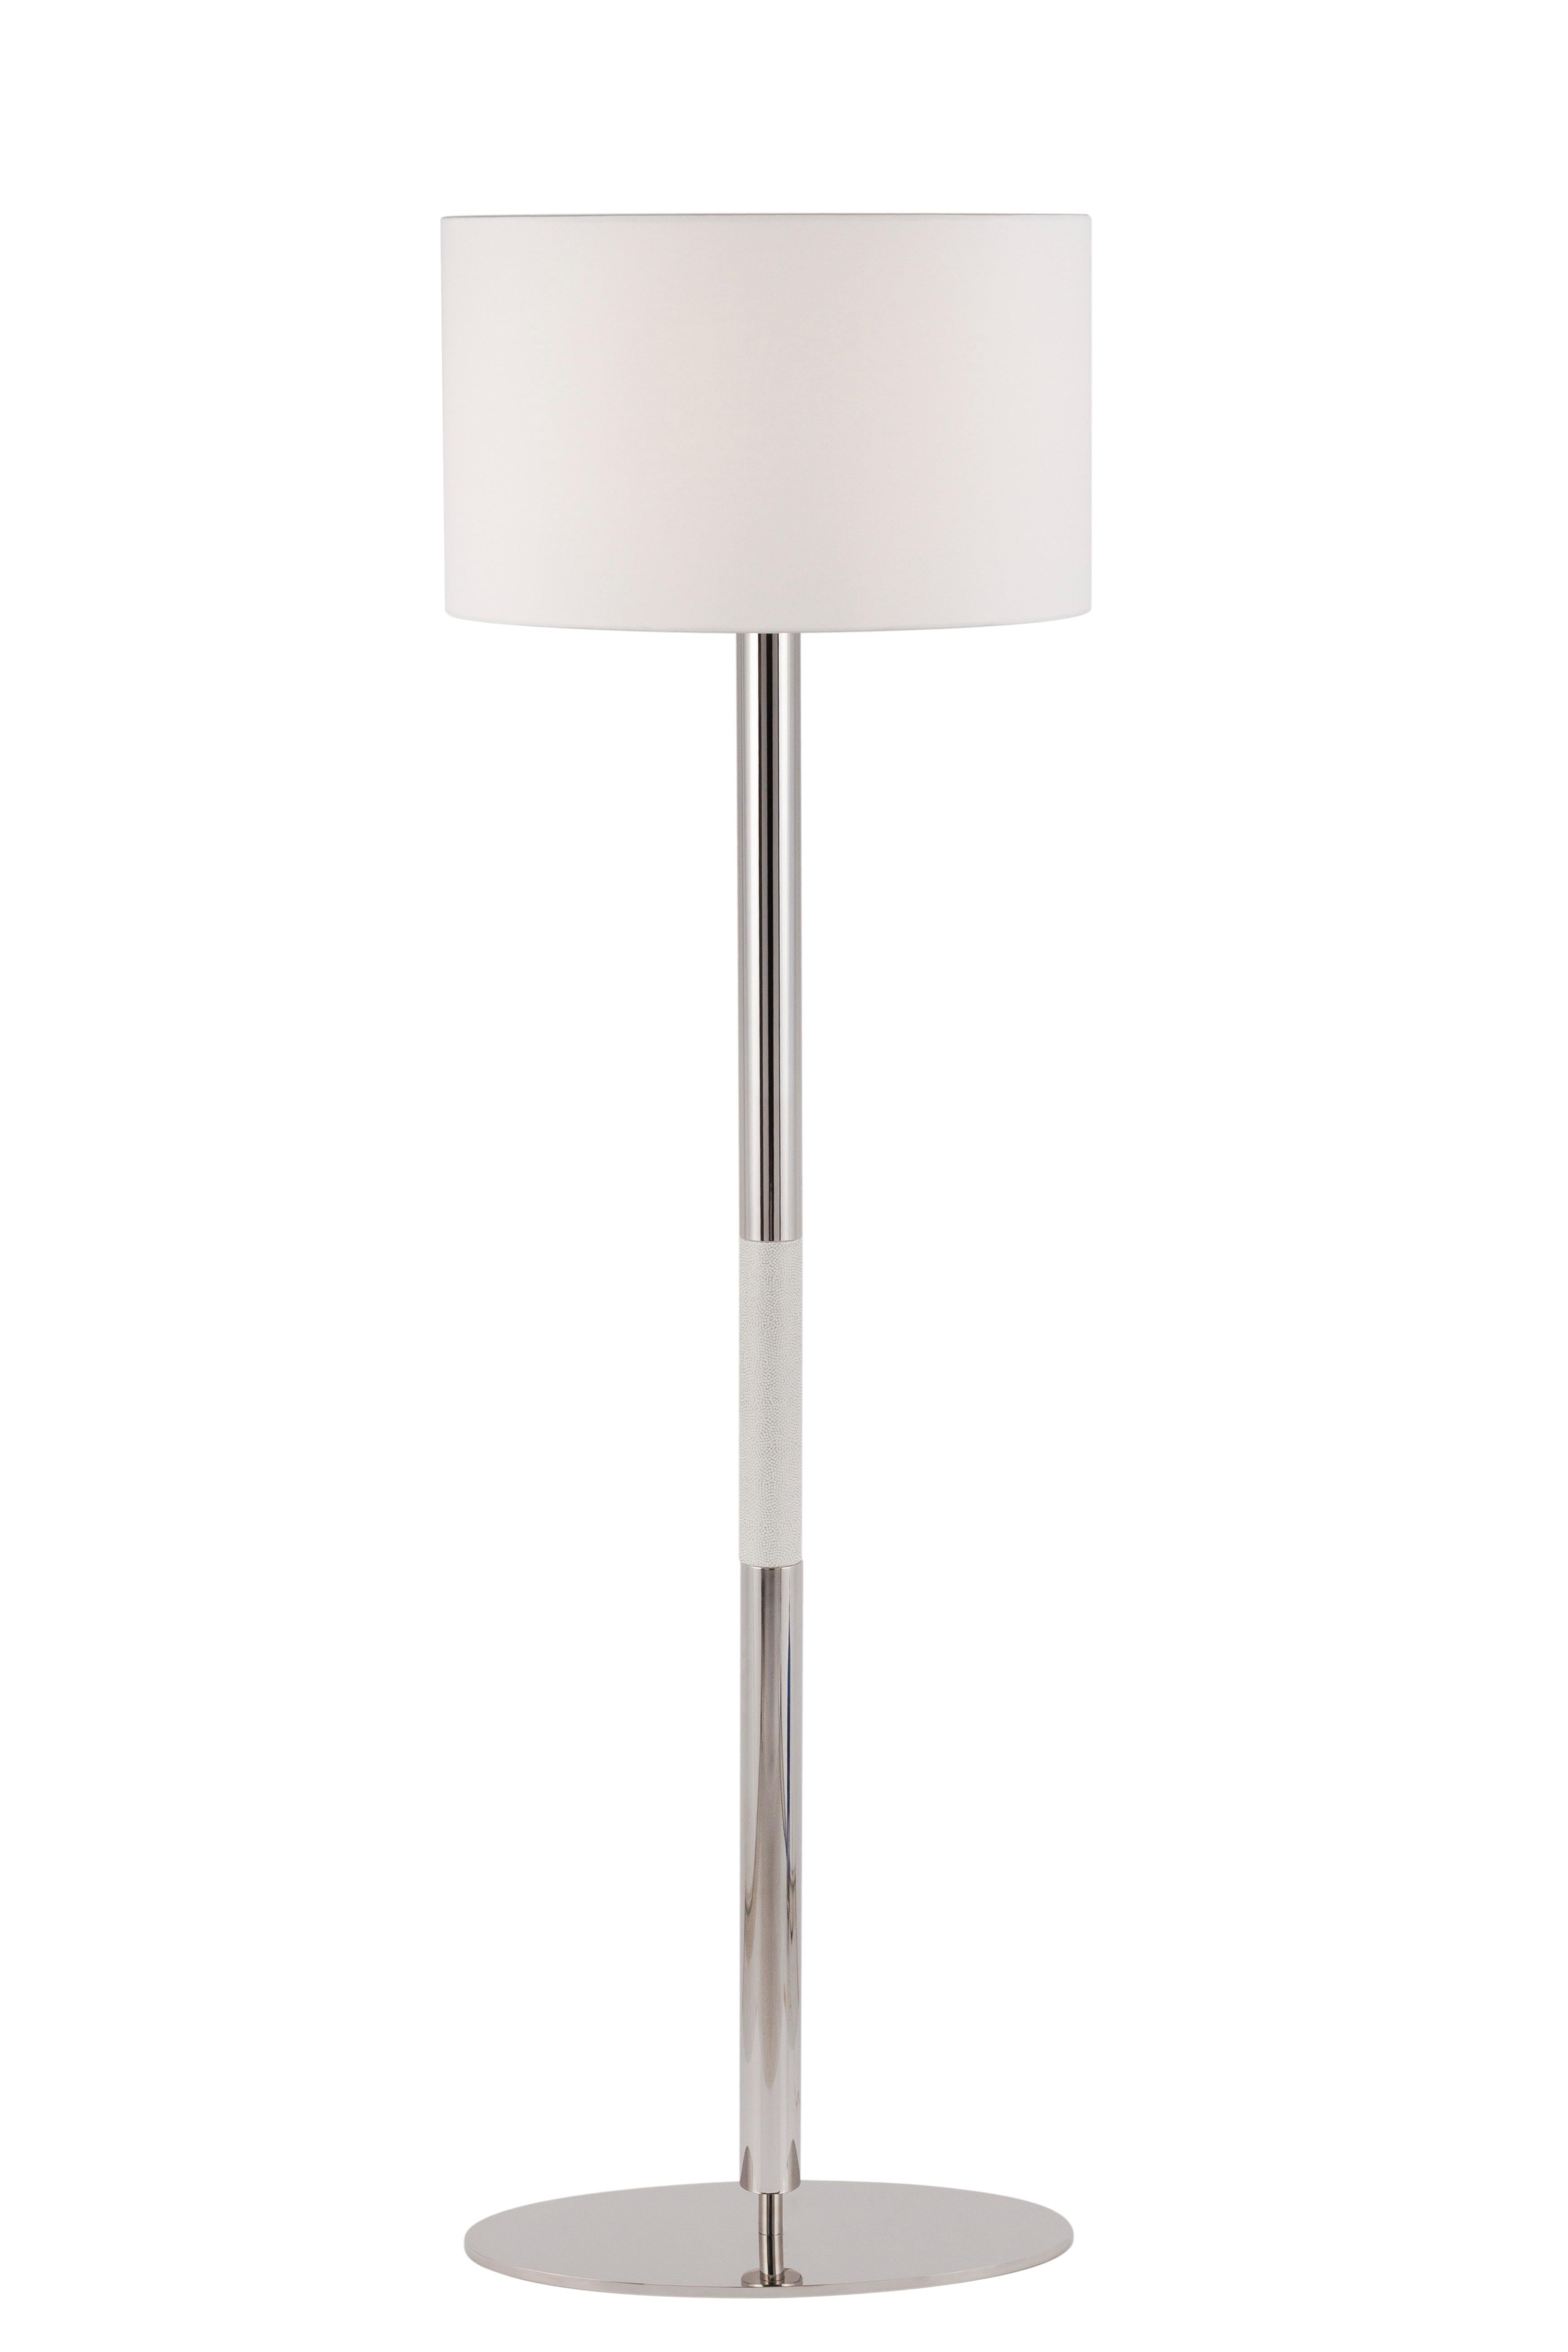 Gau Floor Lamp, Modern Collection, Handcrafted in Portugal - Europe by GF Modern.

The luxurious floor lamp Gau creates a subliminal ambience for extraordinary living. The inlay detail in pearl-coloured faux leather harmonises with the wonderful